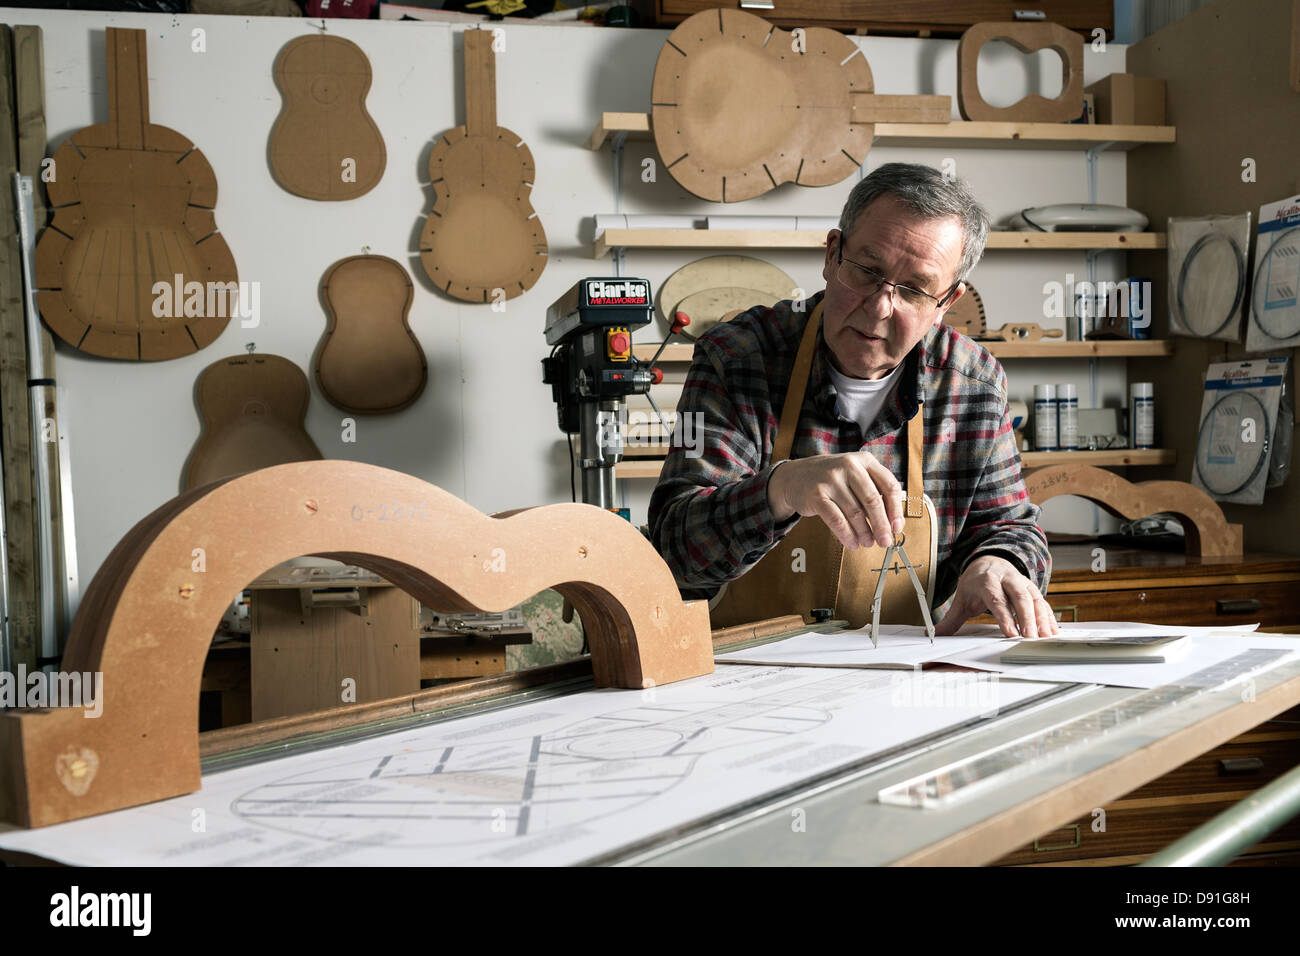 Guitar maker working on plans for an acoustic guitar in workshop Stock Photo